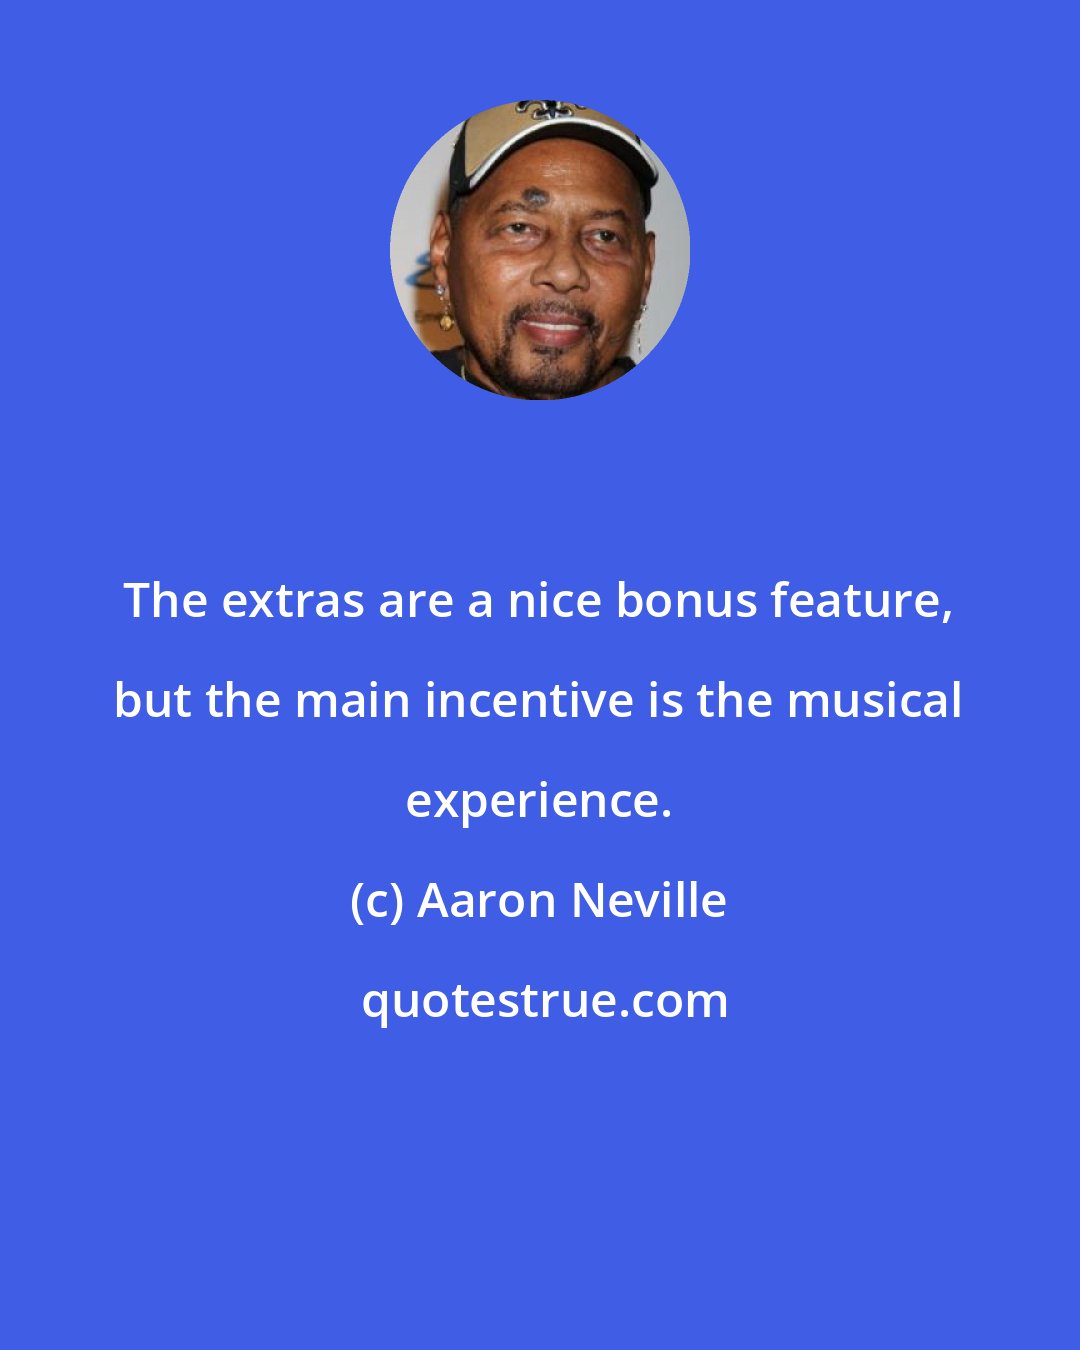 Aaron Neville: The extras are a nice bonus feature, but the main incentive is the musical experience.